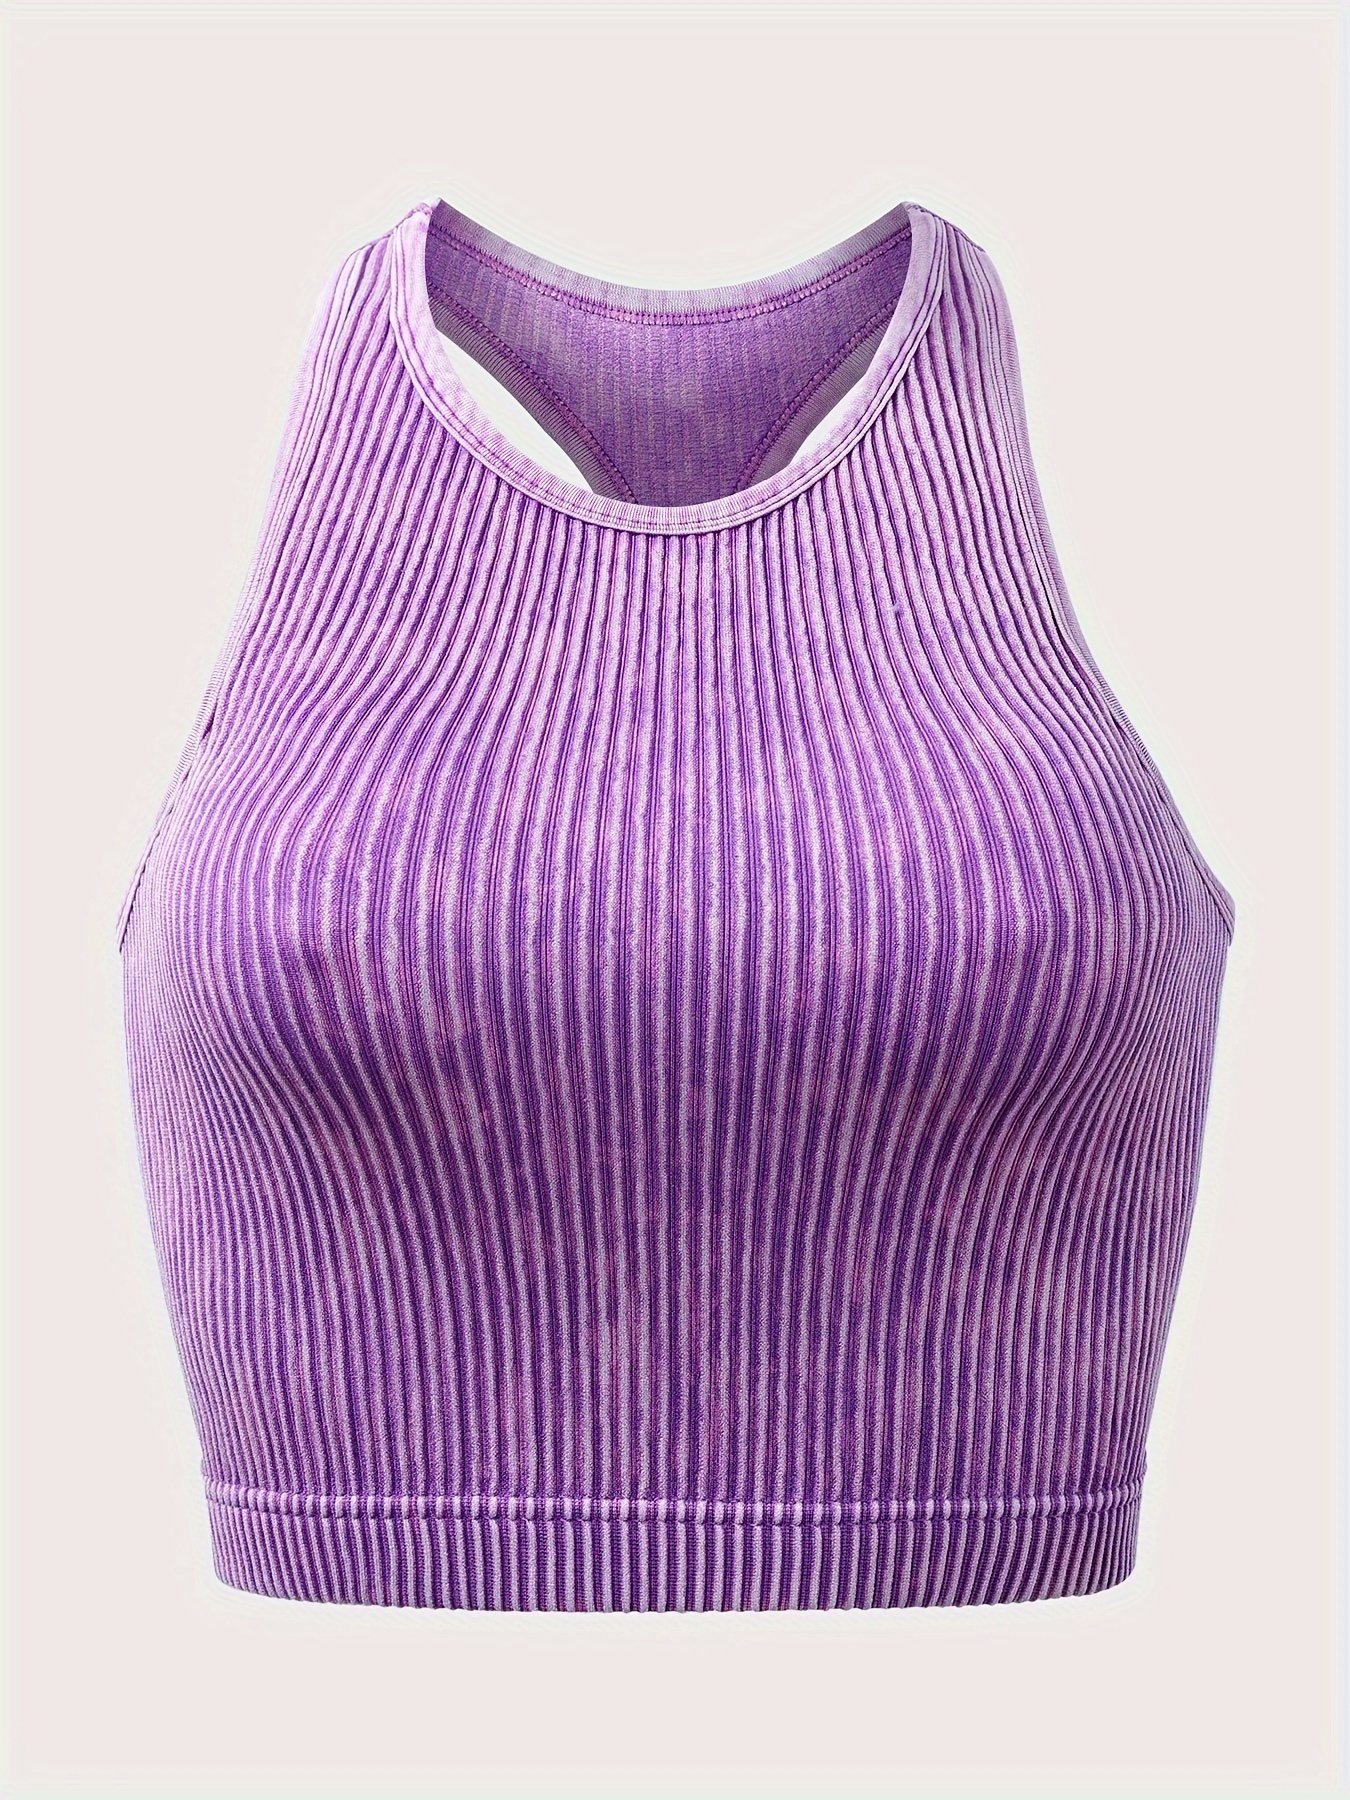 Women Workout Crop Top Built in Bra Ribbed Athletic Tank Tops Casual  Sleeveless Collar Shirts Padded Sports Yoga Vest, Solid Purple, Small